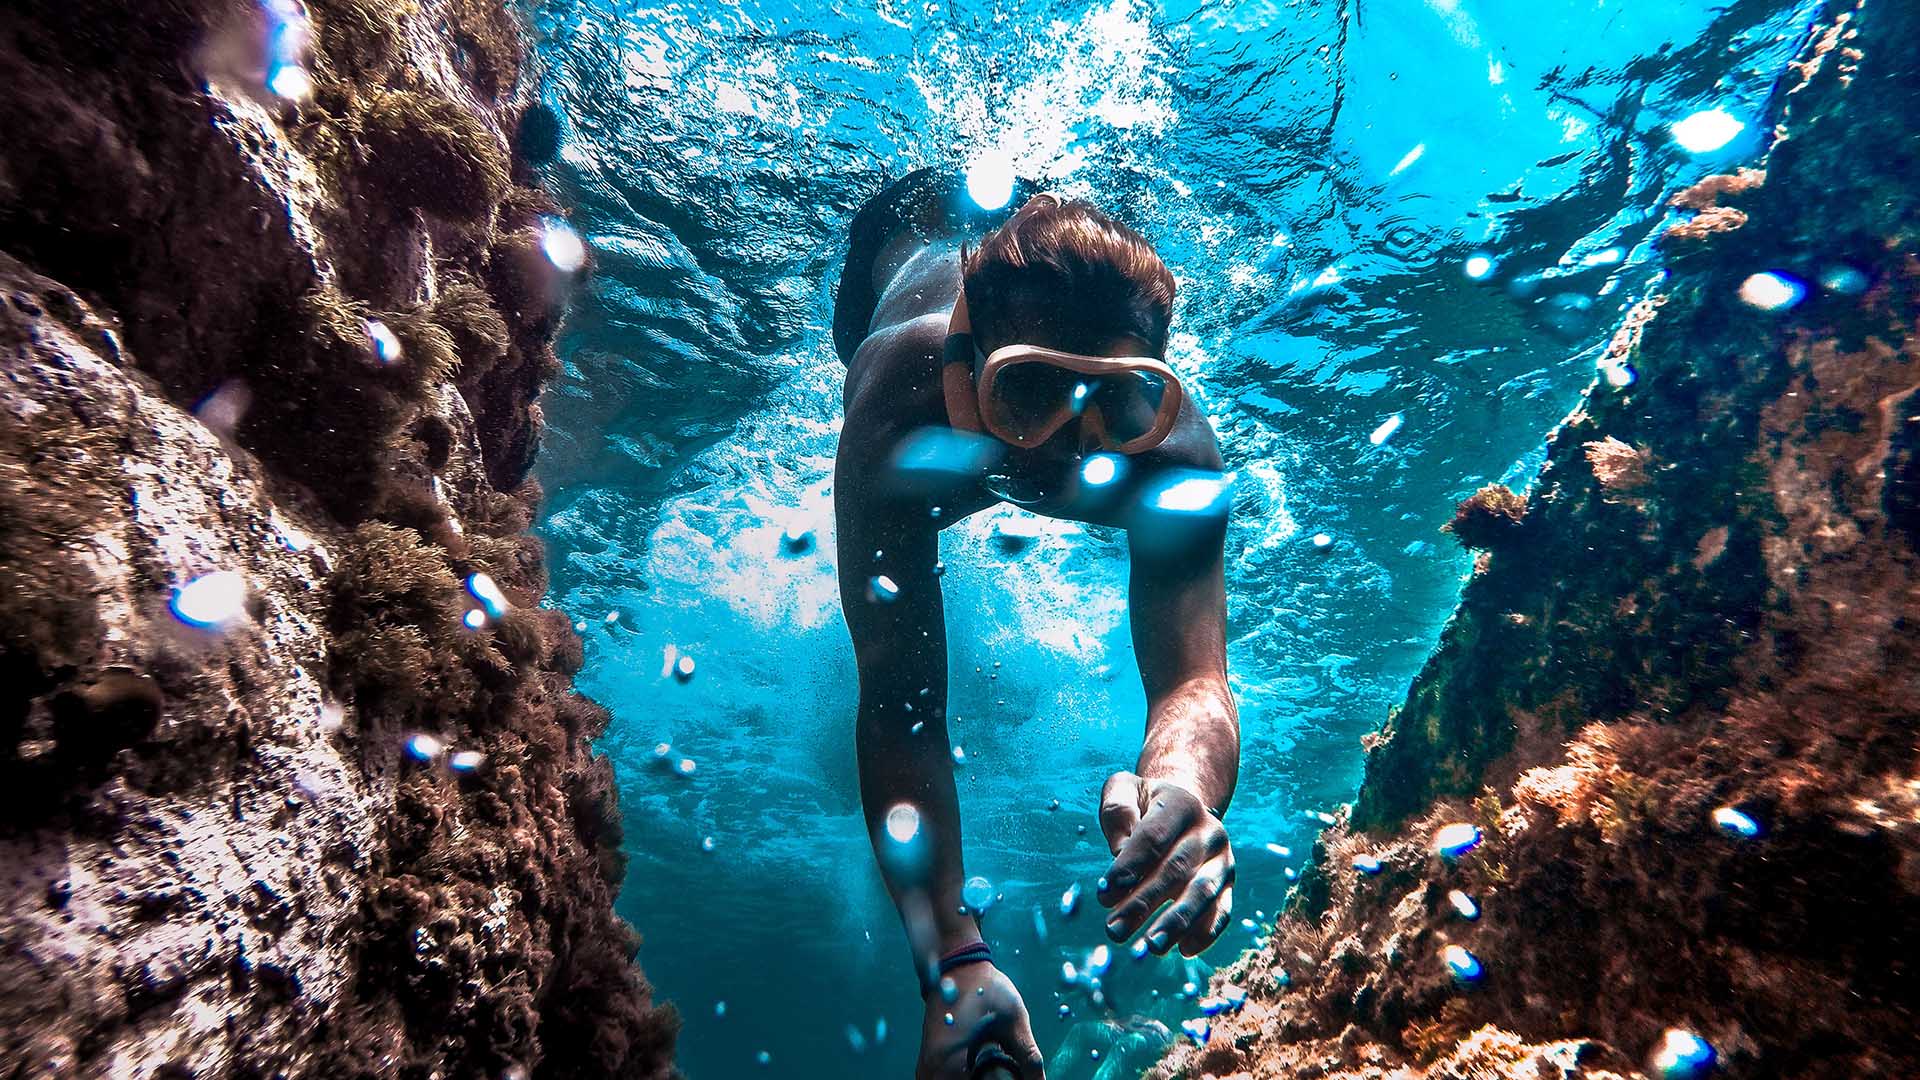 This New Tracking System Will Stop Swimmers and Divers Being Left Behind on the Great Barrier Reef